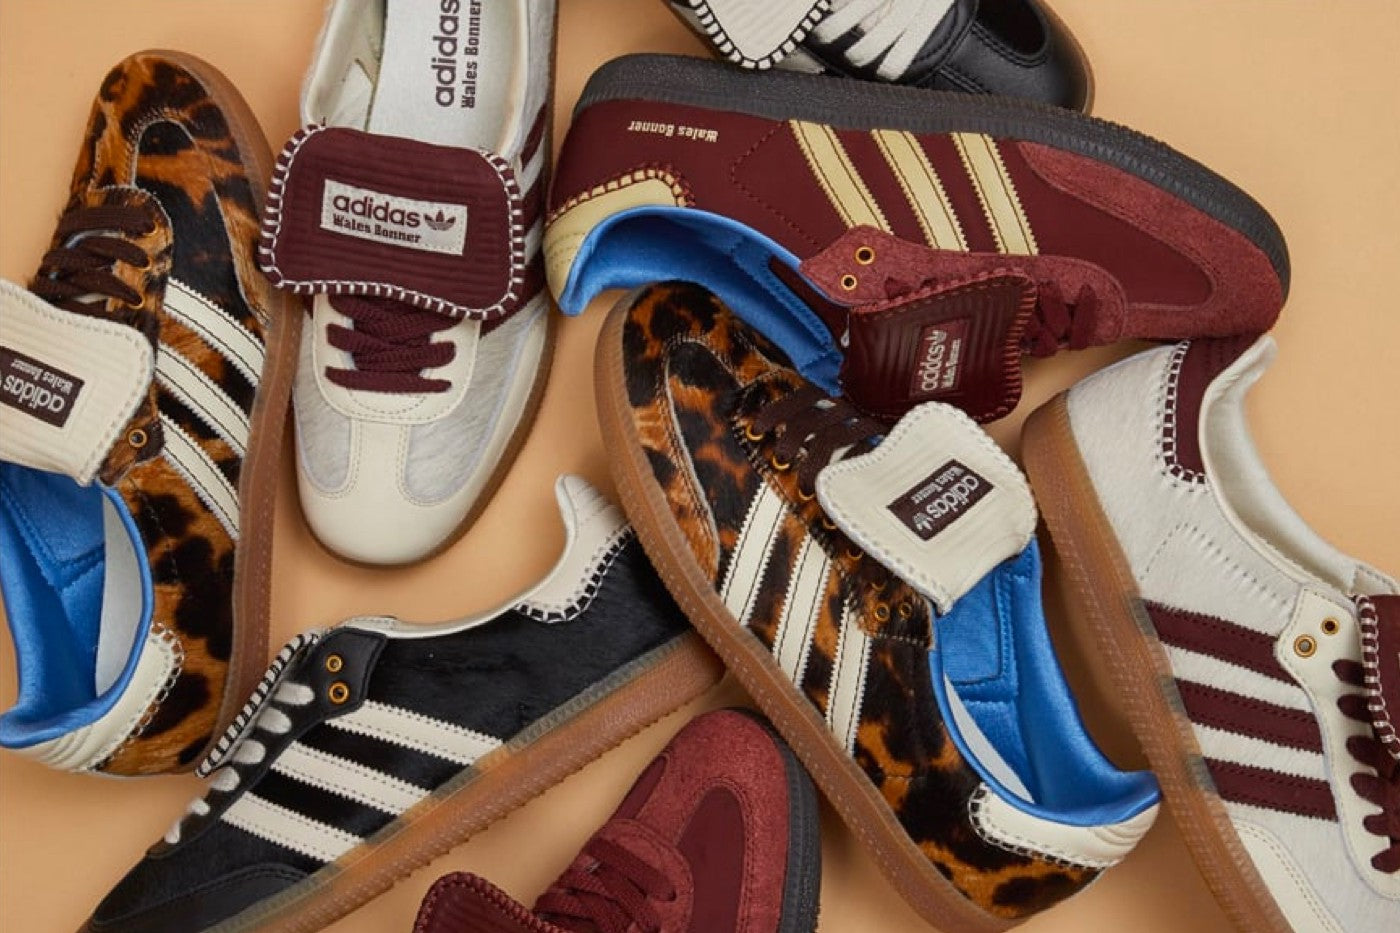 The Wales Bonner x adidas Samba AW23 Collection is Available Here!